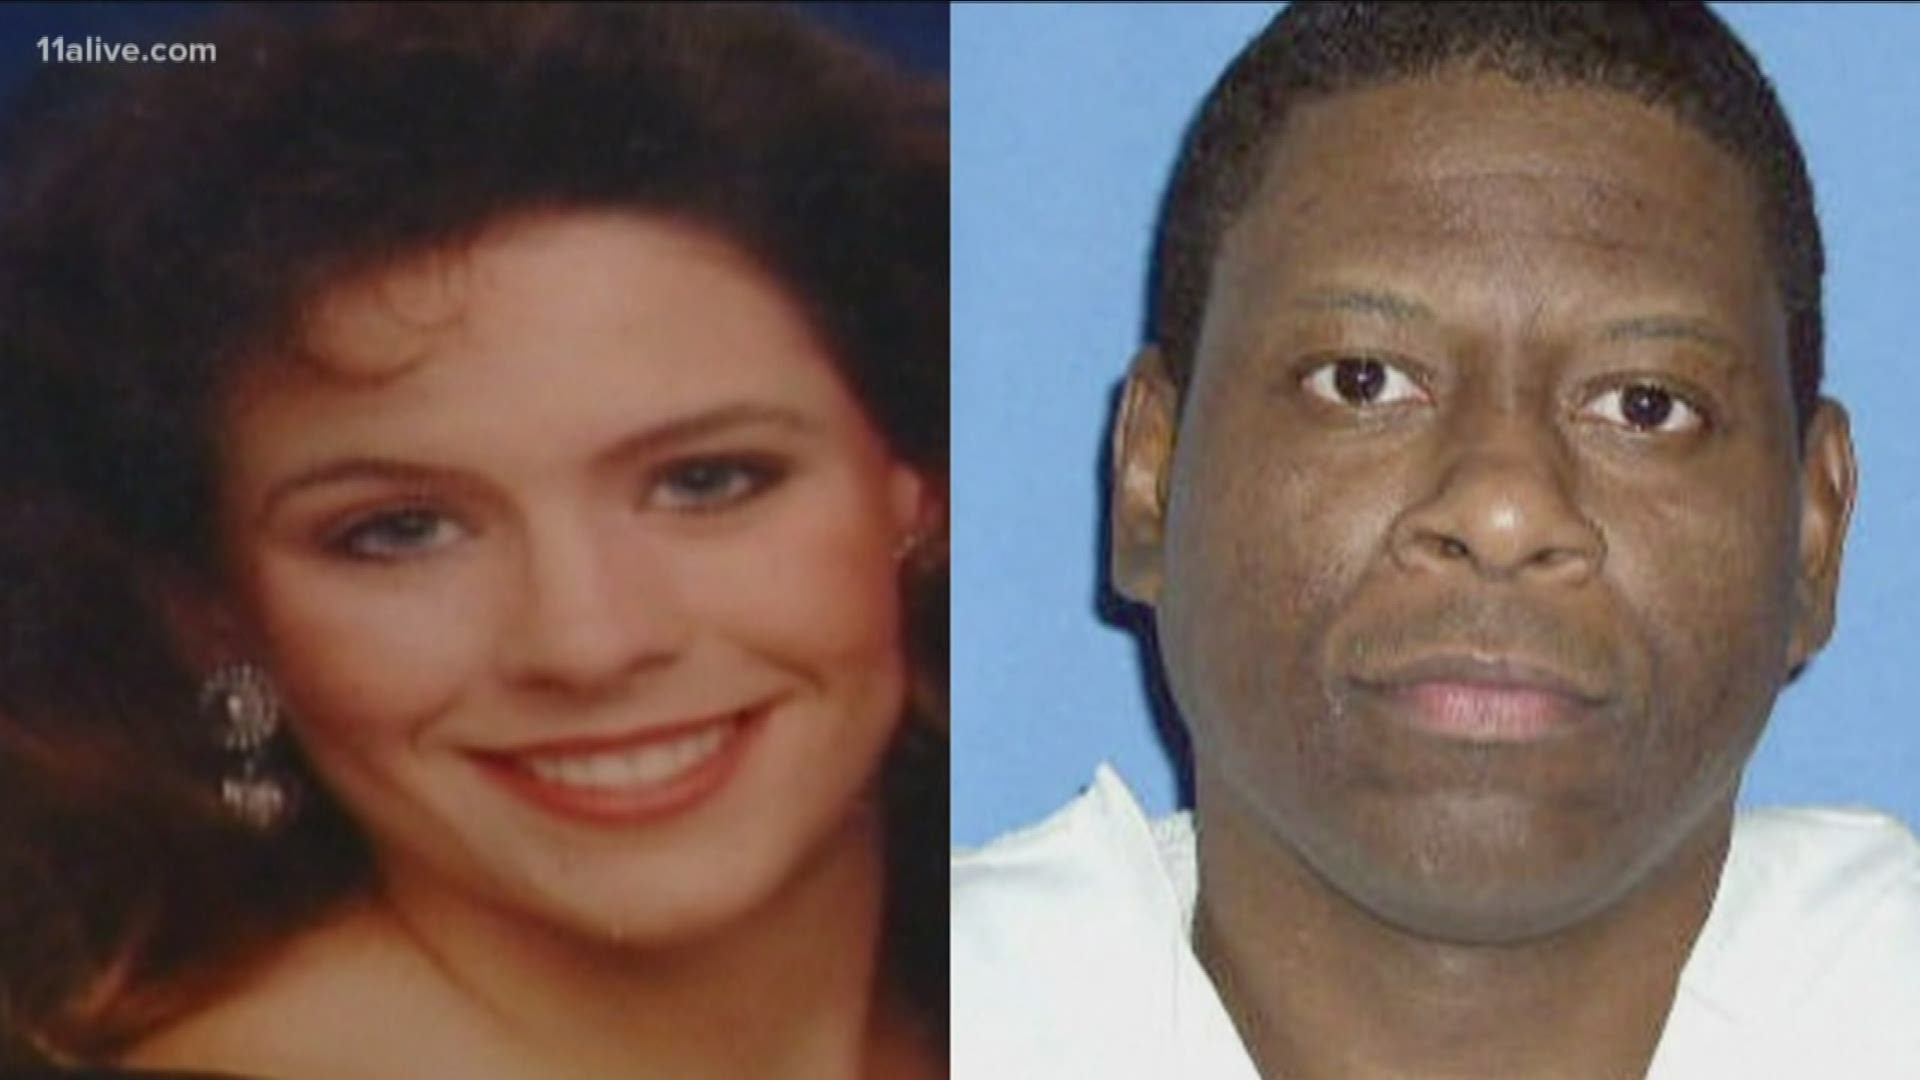 A growing list of celebrities, religious leaders and Texas representatives are asking for a reprieve for the man on death row for a 1996 murder.